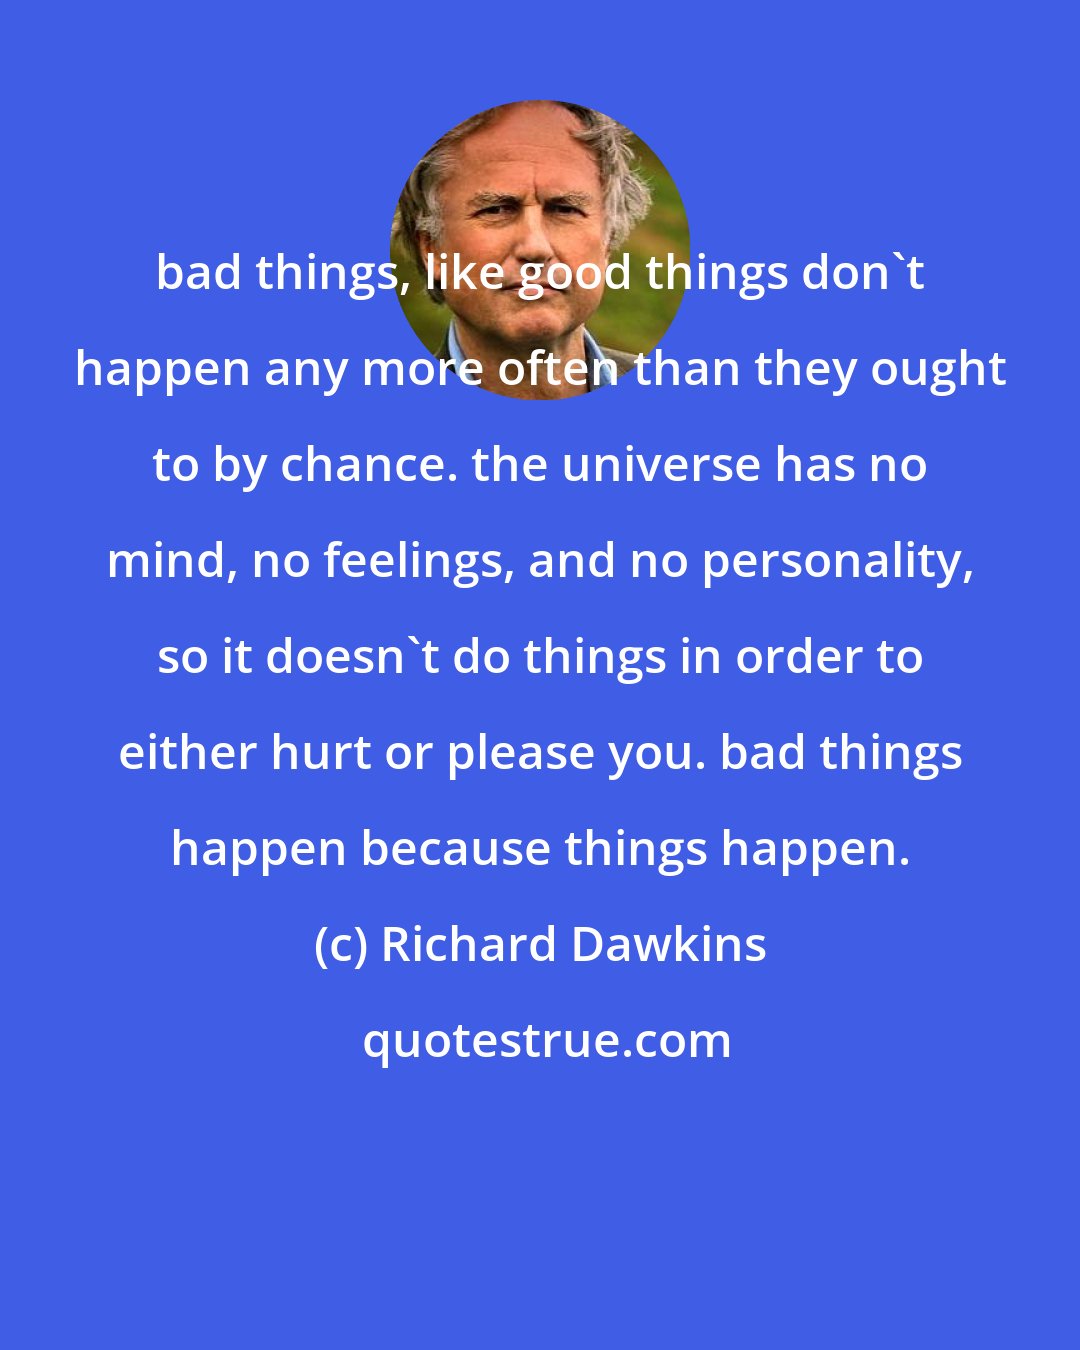 Richard Dawkins: bad things, like good things don't happen any more often than they ought to by chance. the universe has no mind, no feelings, and no personality, so it doesn't do things in order to either hurt or please you. bad things happen because things happen.